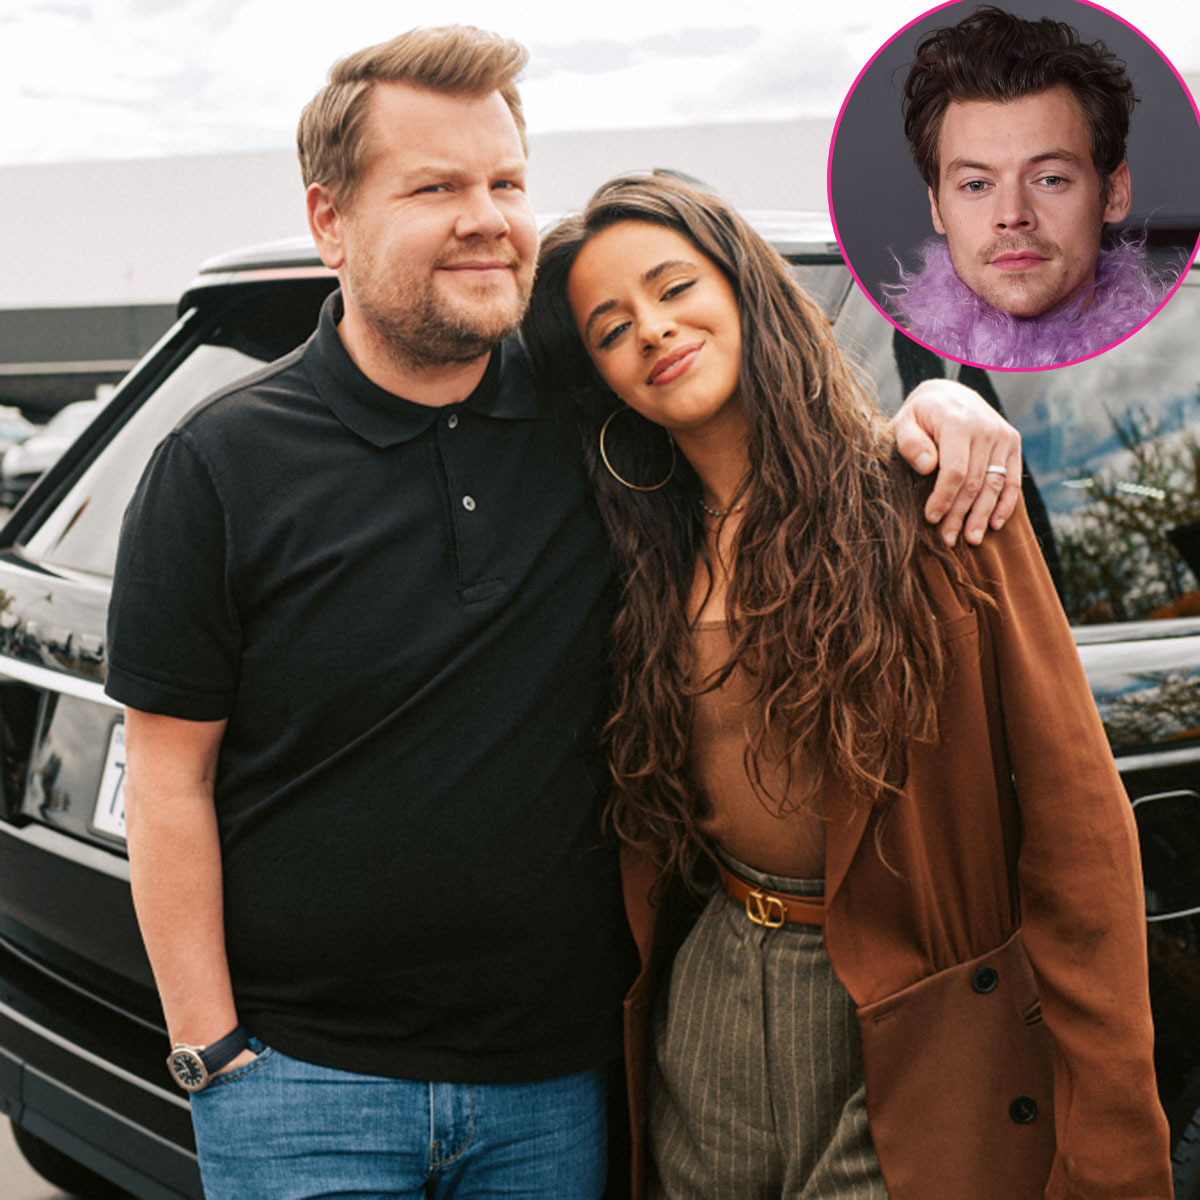 Camila Cabello How My Embarrassing Harry Styles Crush Changed My Life James Corden